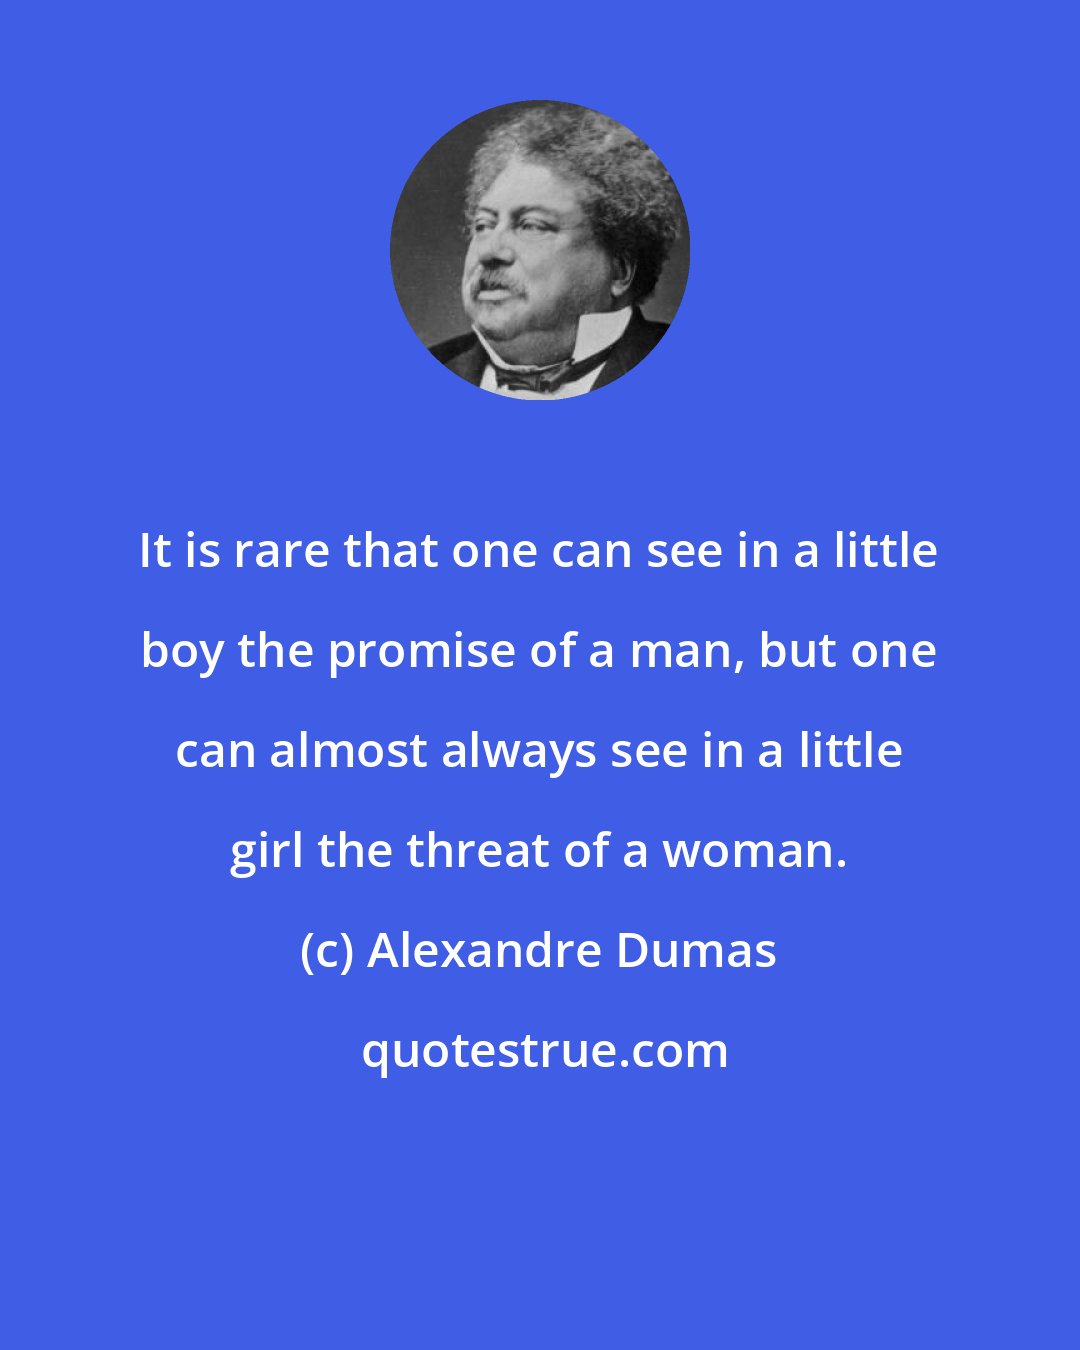 Alexandre Dumas: It is rare that one can see in a little boy the promise of a man, but one can almost always see in a little girl the threat of a woman.